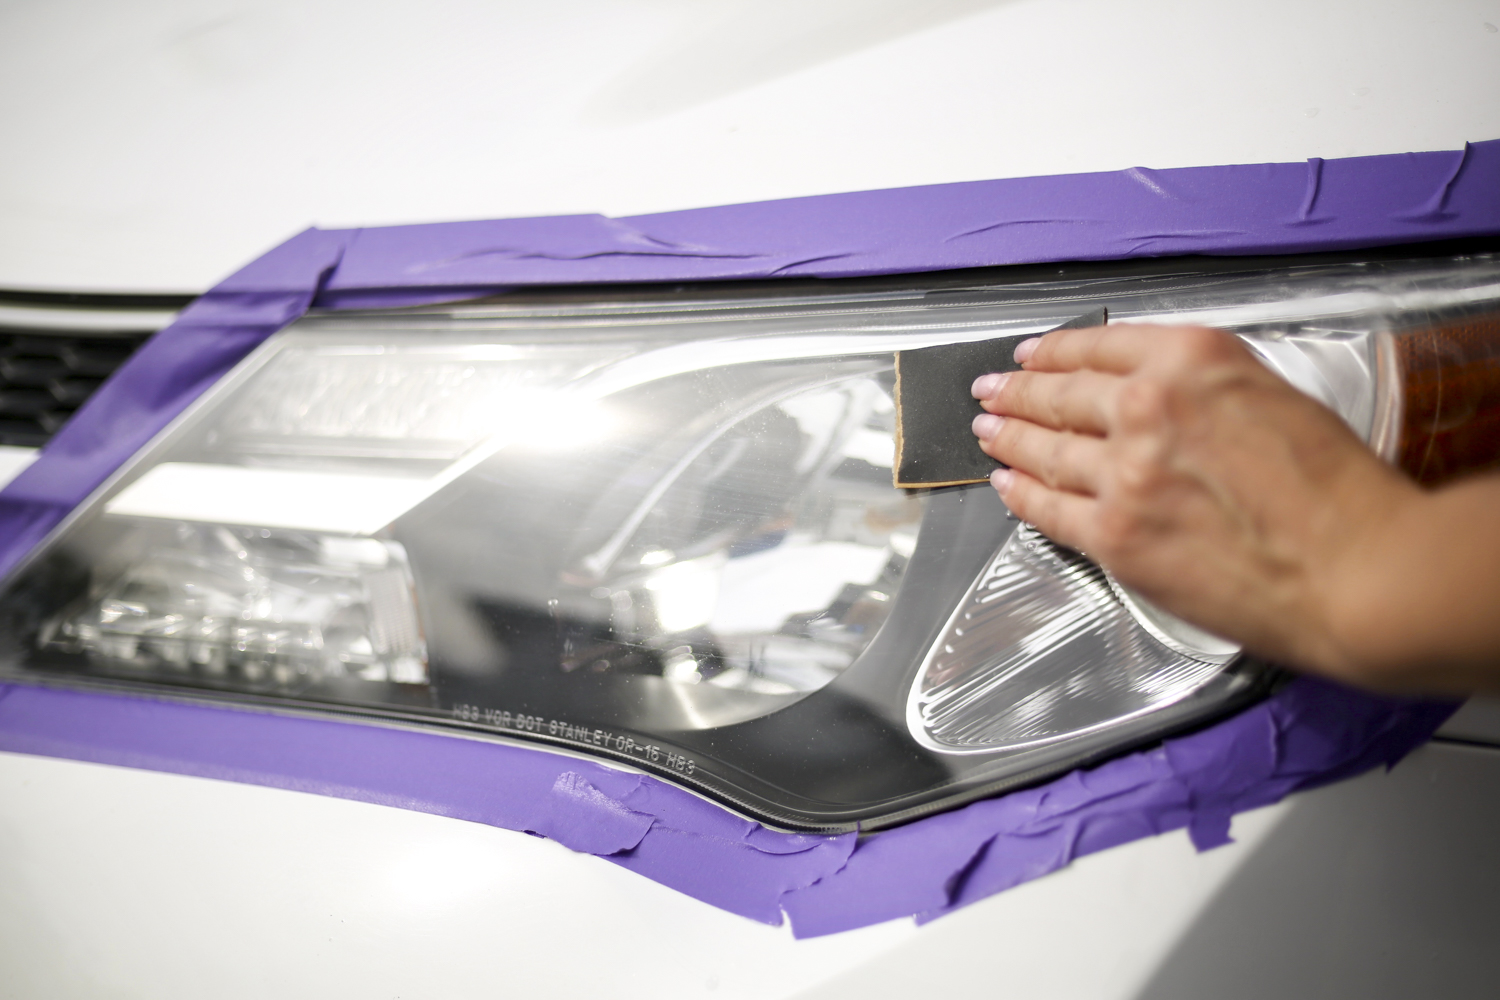 Foggy headlights? Ditch the baking soda for something that works. 